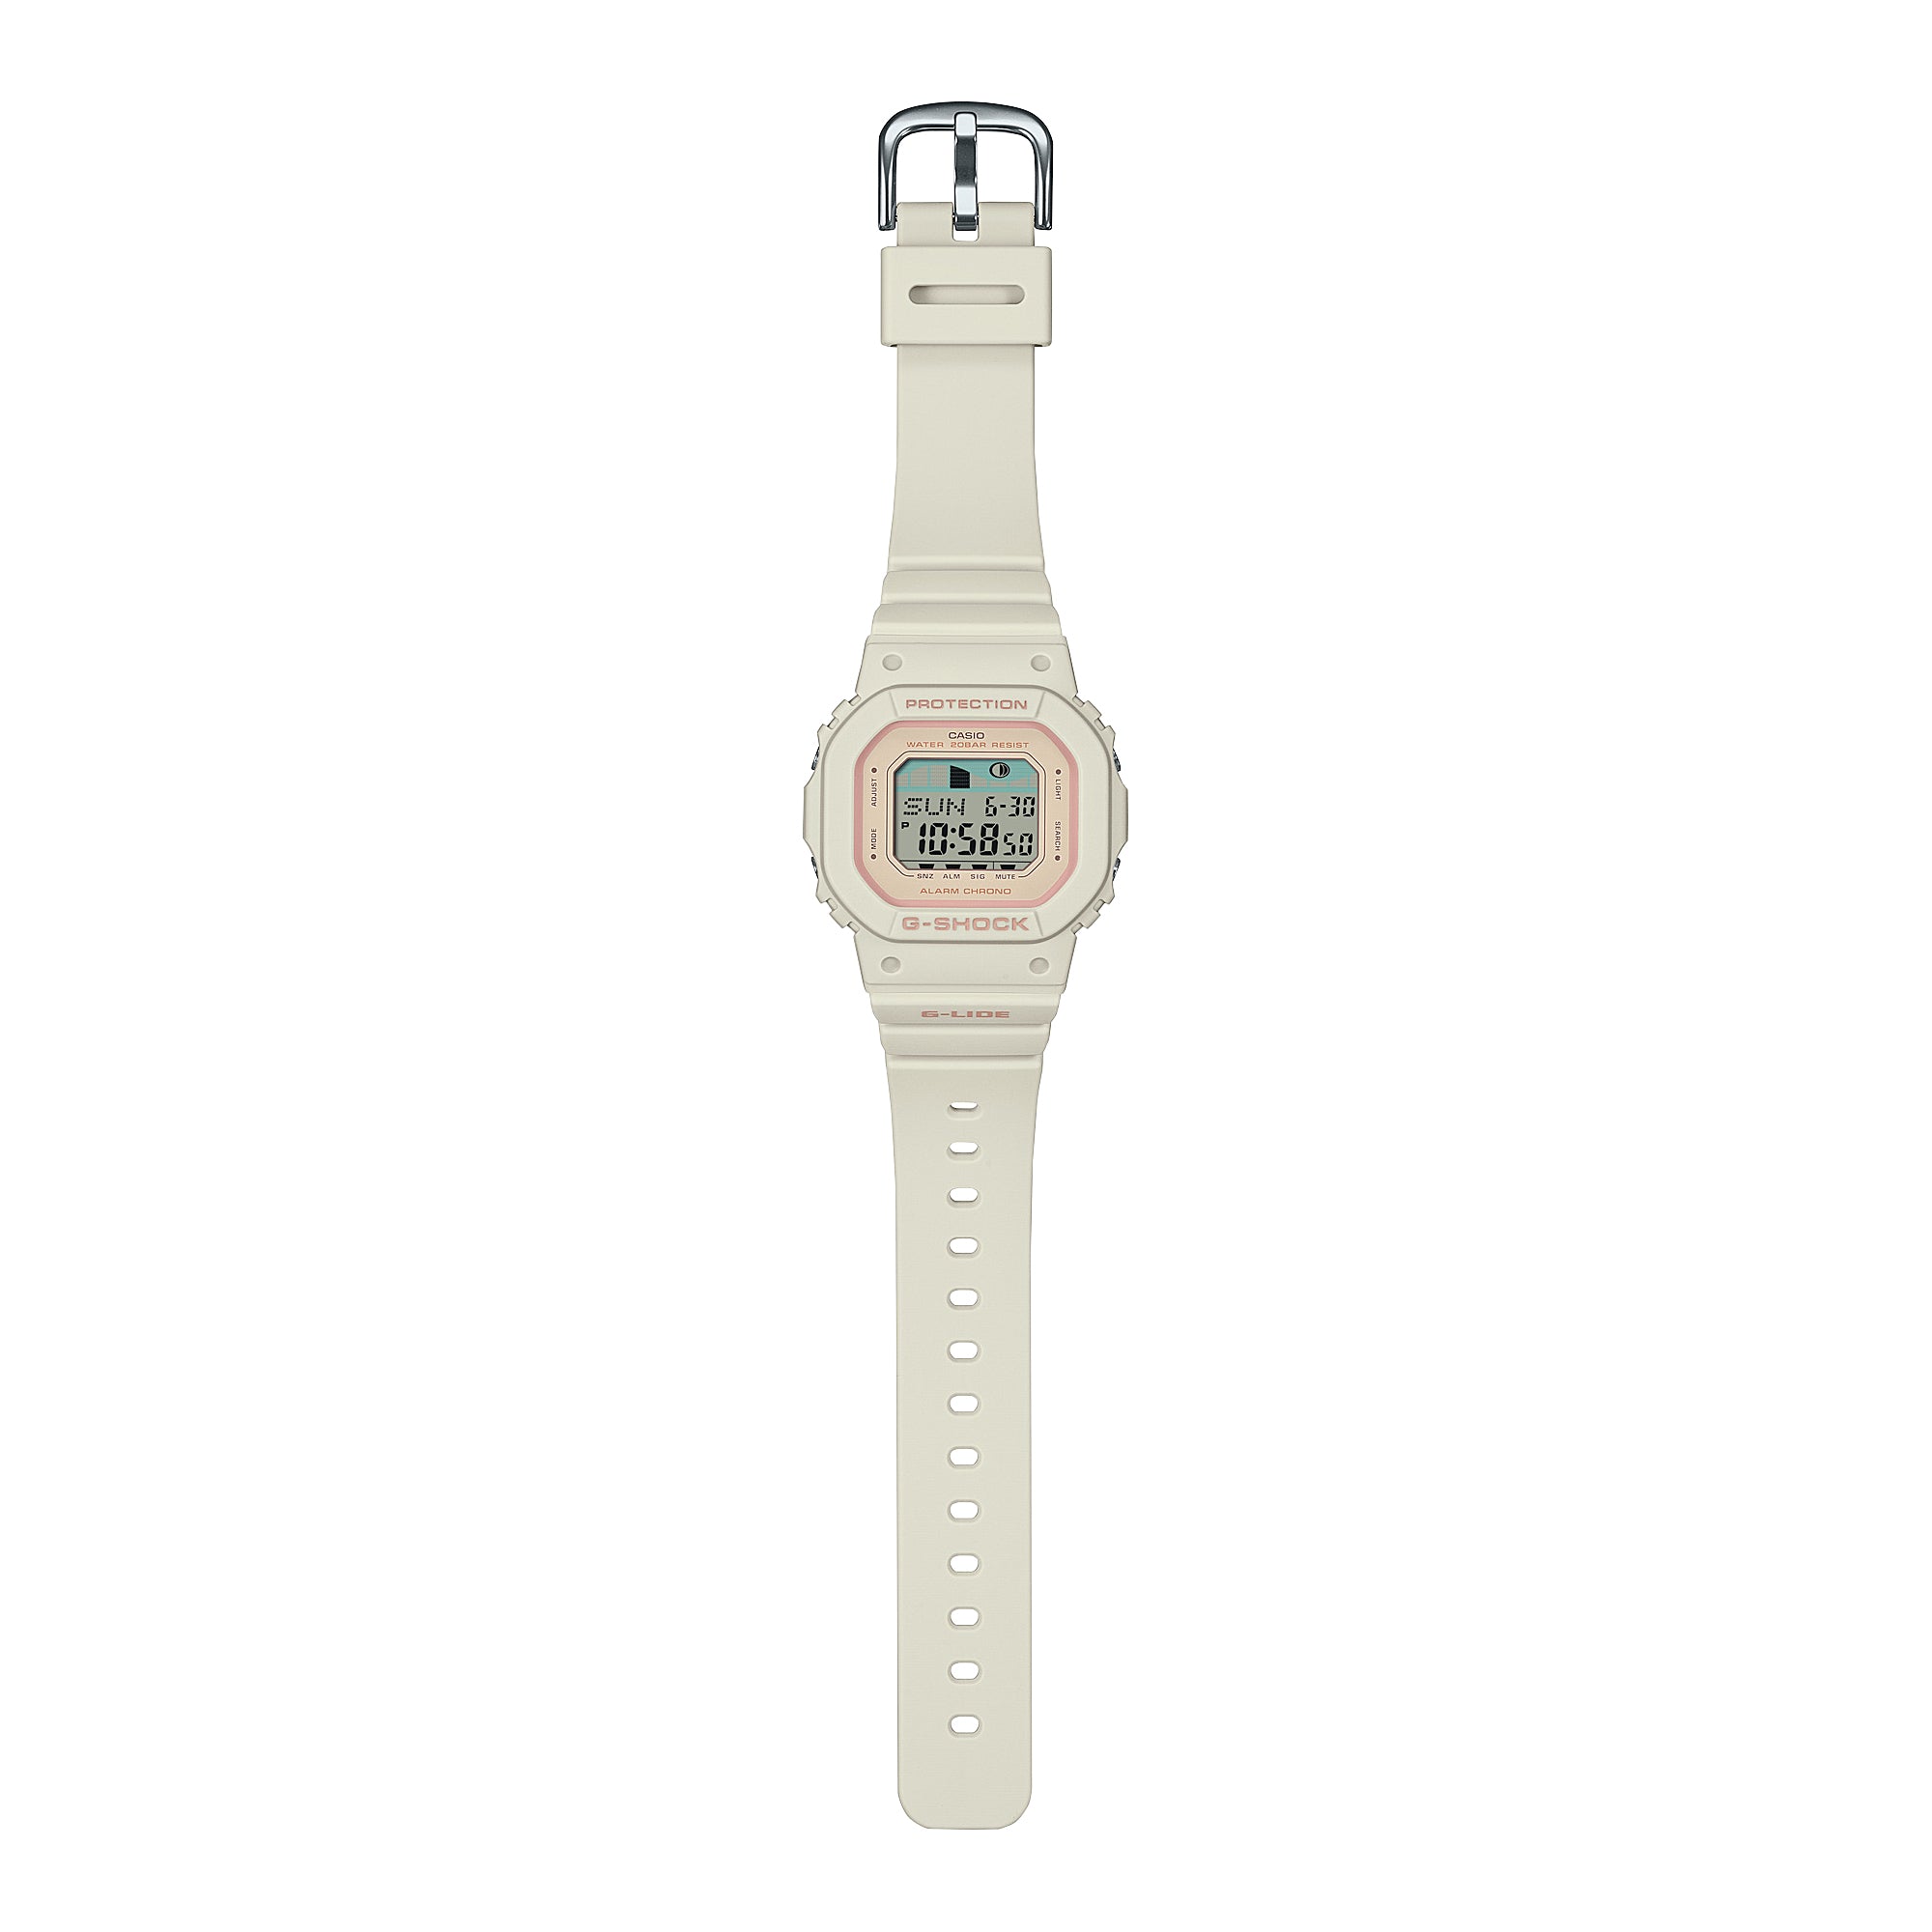 Casio G-Shock for Ladies' G-LIDE Eco-Friendly Bio-Based White Resin Band Watch GLXS5600-7D GLX-S5600-7D GLX-S5600-7